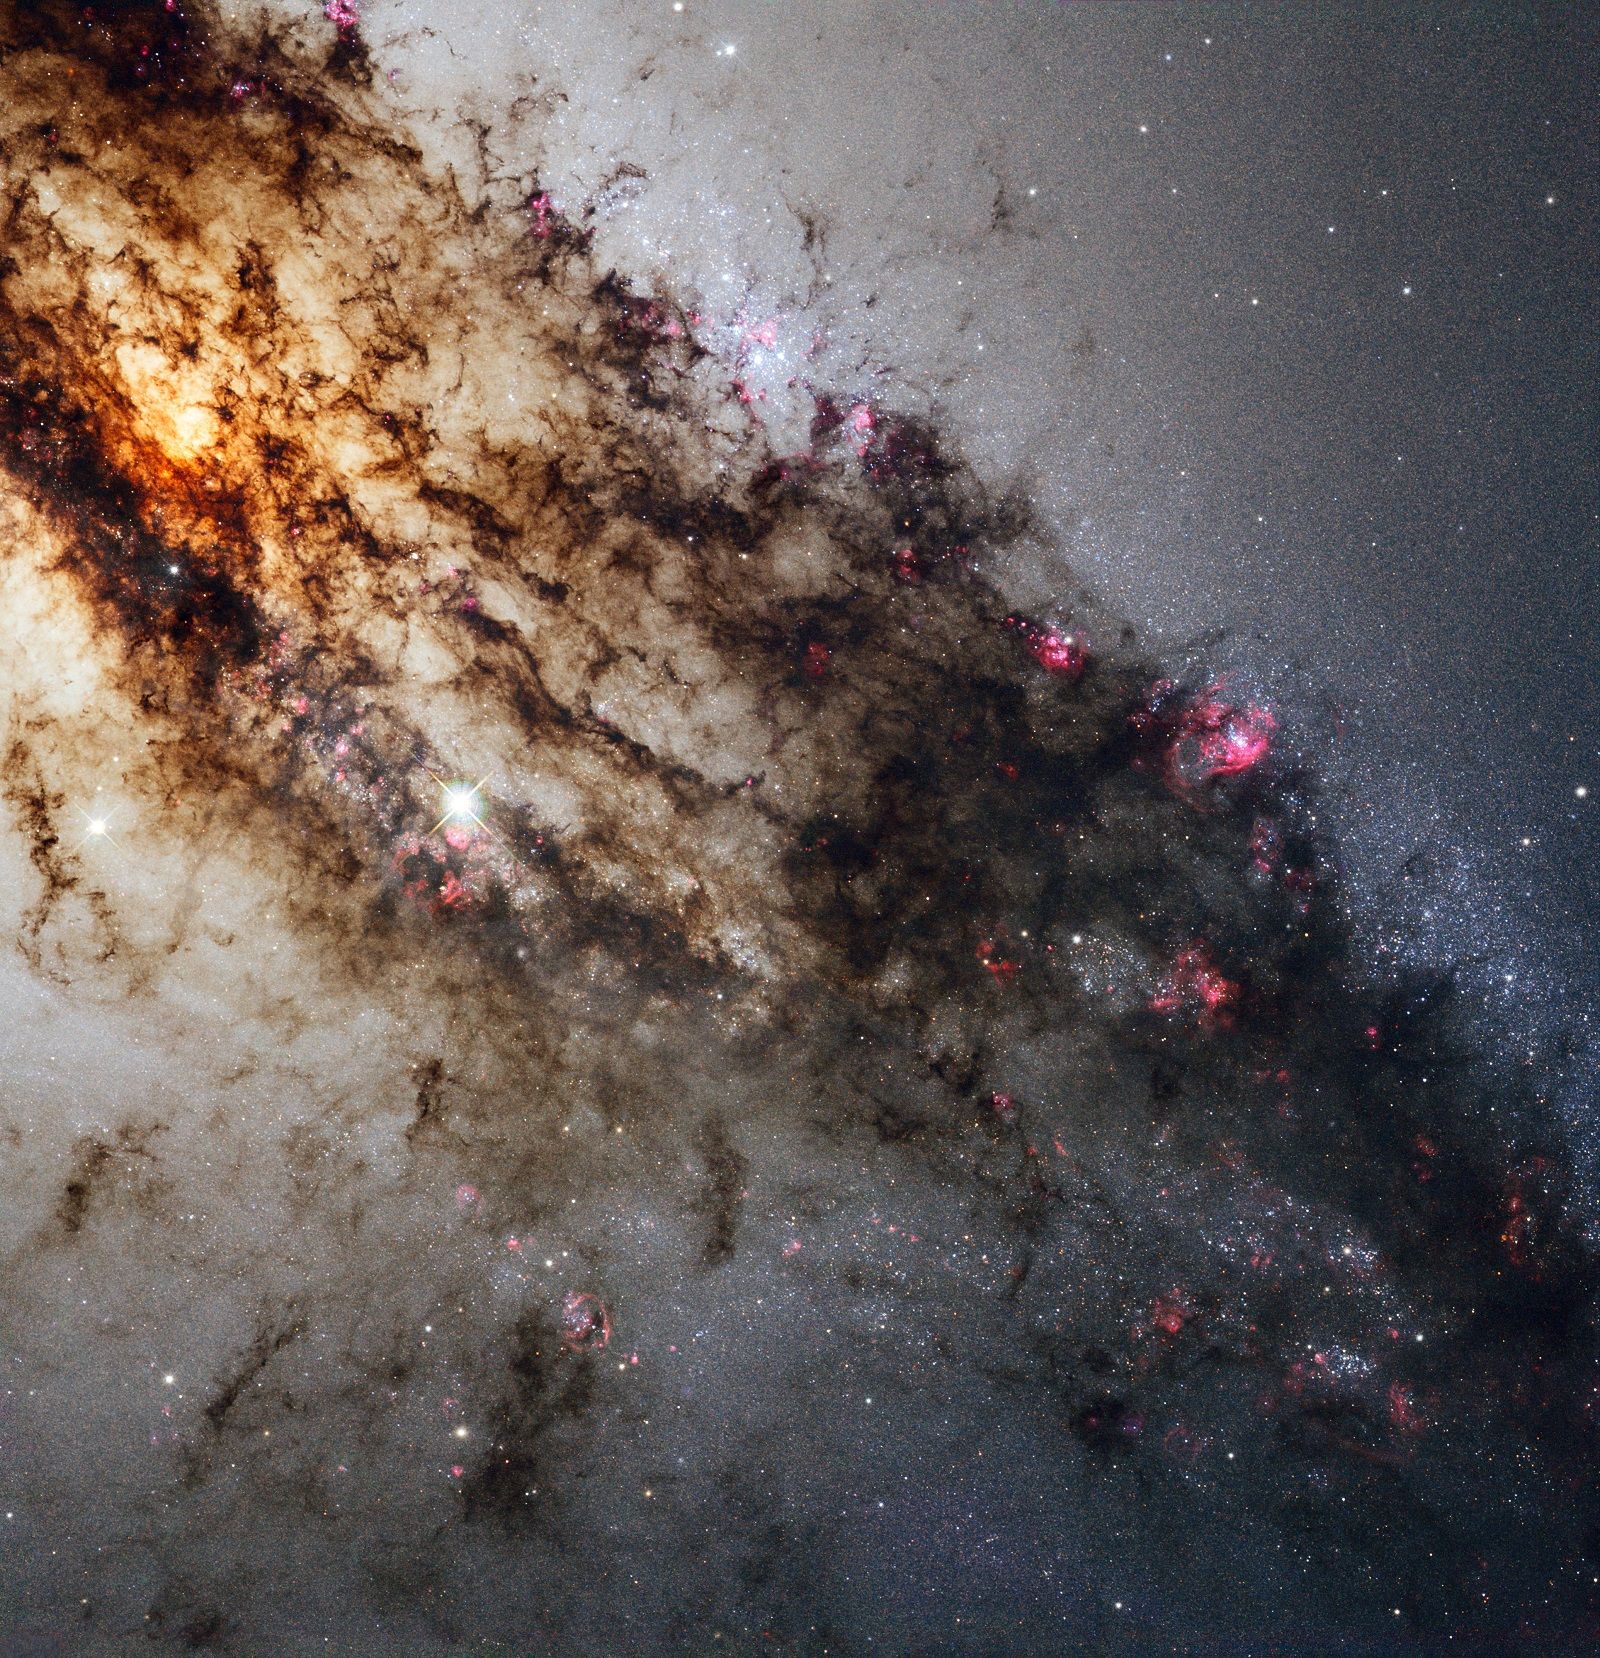 Astounding images from the depths of the Universe courtesy of the Hubble Space Telescope image 17